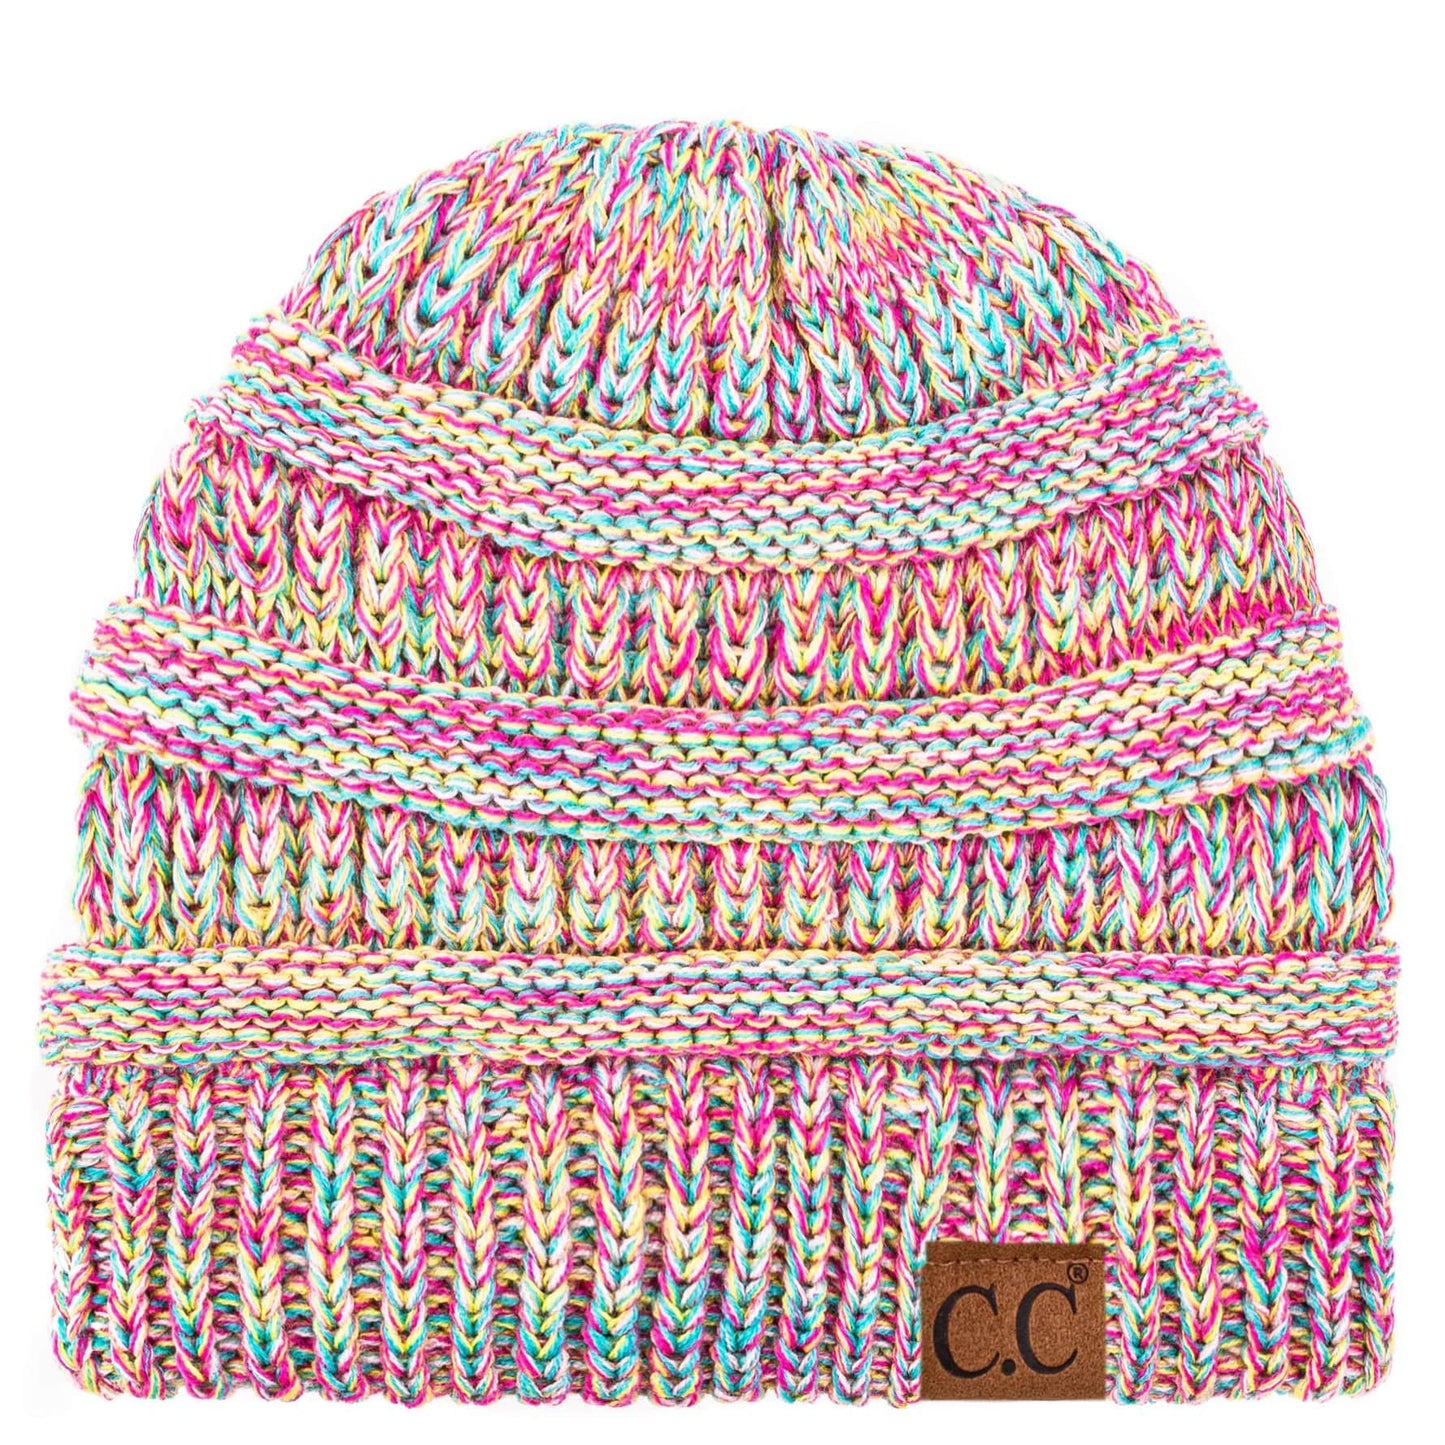 C.C Apparel Bright Mix C.C Trendy Warm Chunky Soft Stretch Three-Toned Cable Knit Beanie Skully